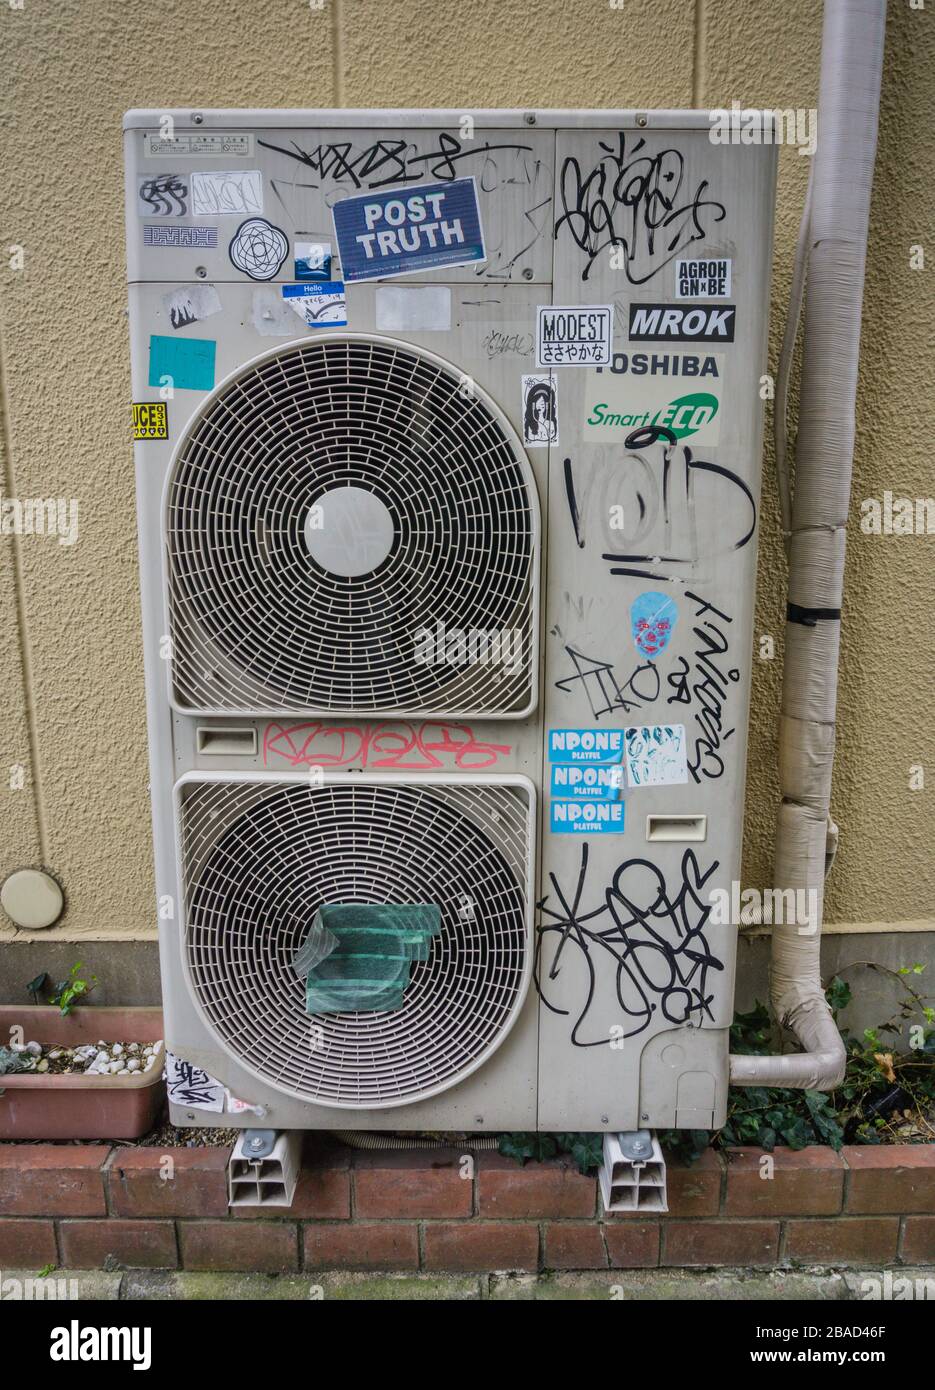 Old air conditioning unit covered in graffiti and stickers outside a house in Nara Japan Stock Photo